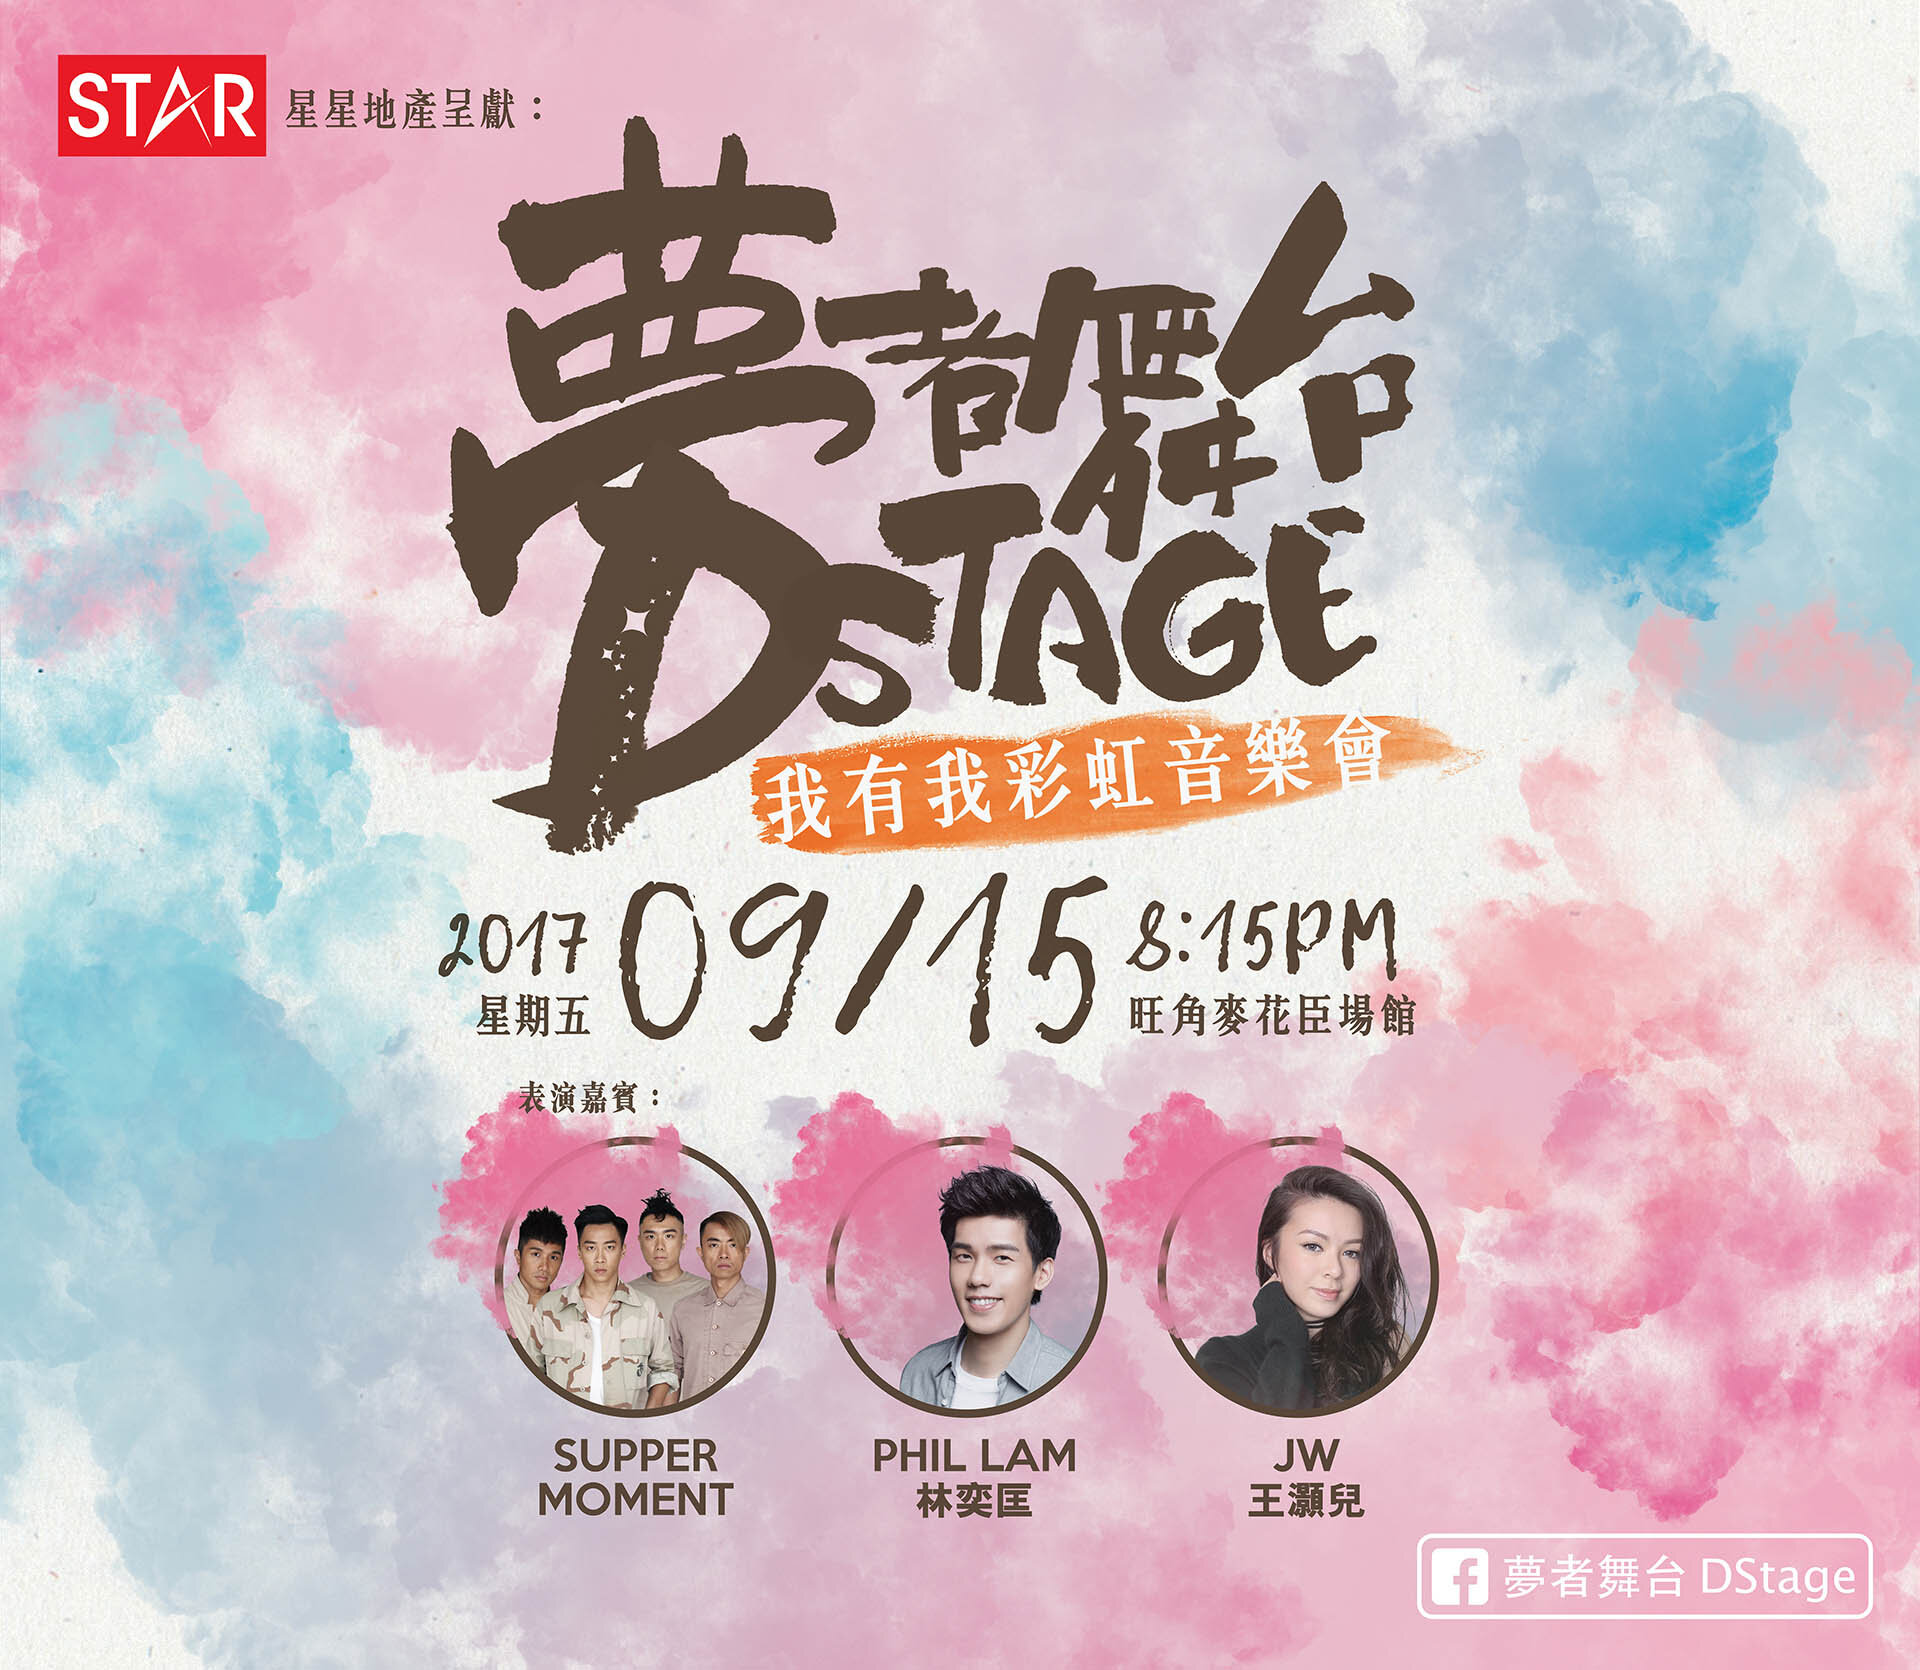 STAR PROPERTIES GROUP NAMED TITLE SPONSOR FOR NON-PROFIT CONCERT IN HONG KONG